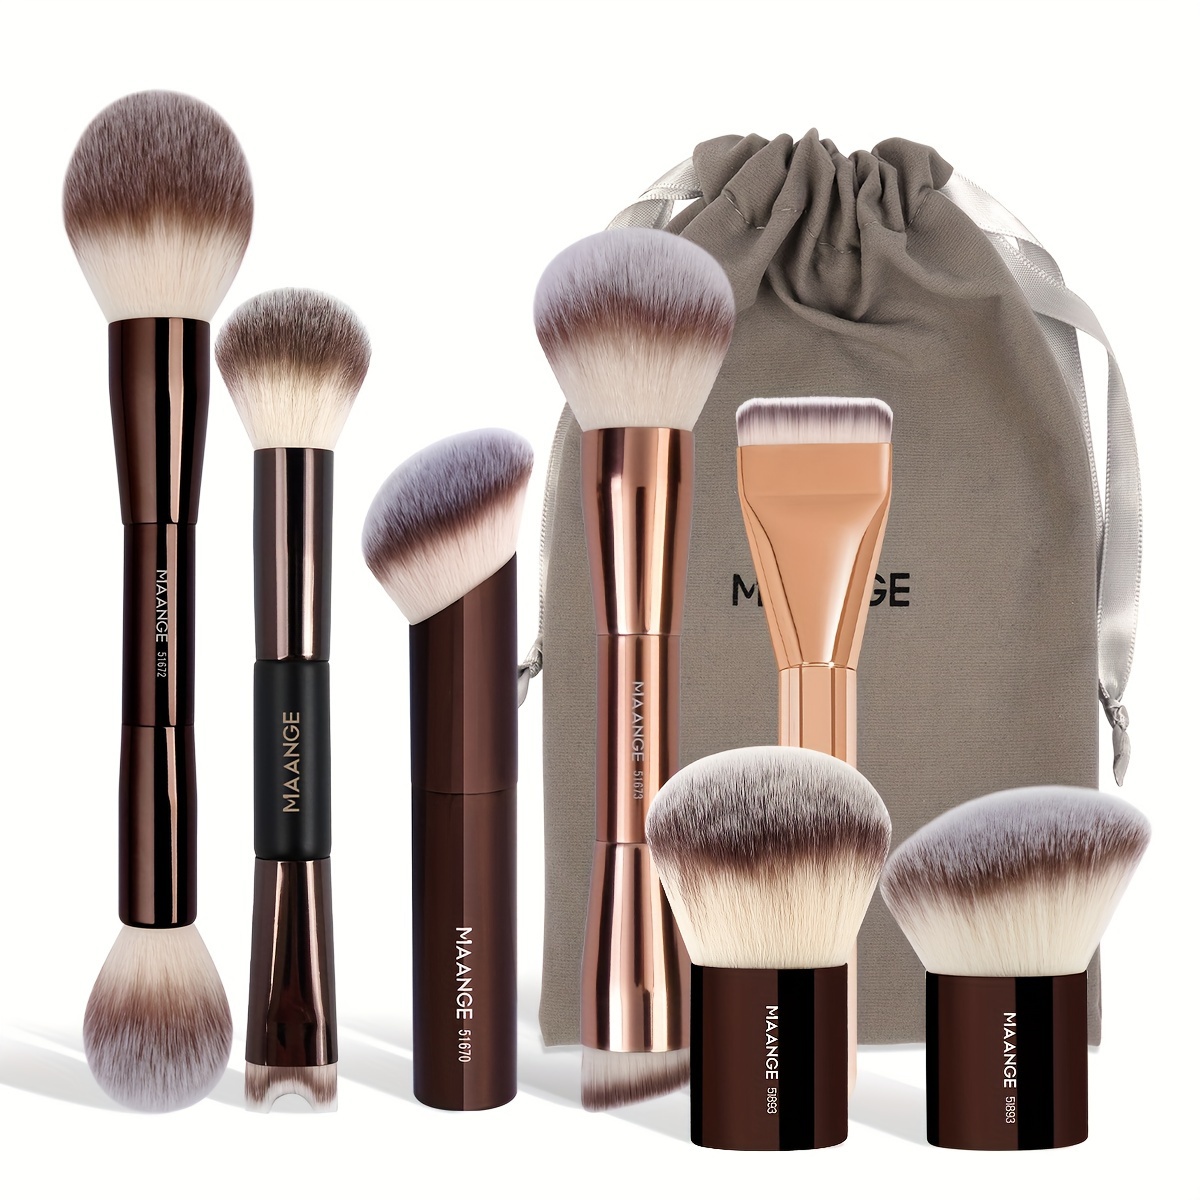 

Maange 7-piece Luxury Makeup Brush Set With Velvet Bag - Soft Nylon Bristles For All Skin Types, Includes Foundation, Blush, Contour & More - Perfect For Beginners & Travel